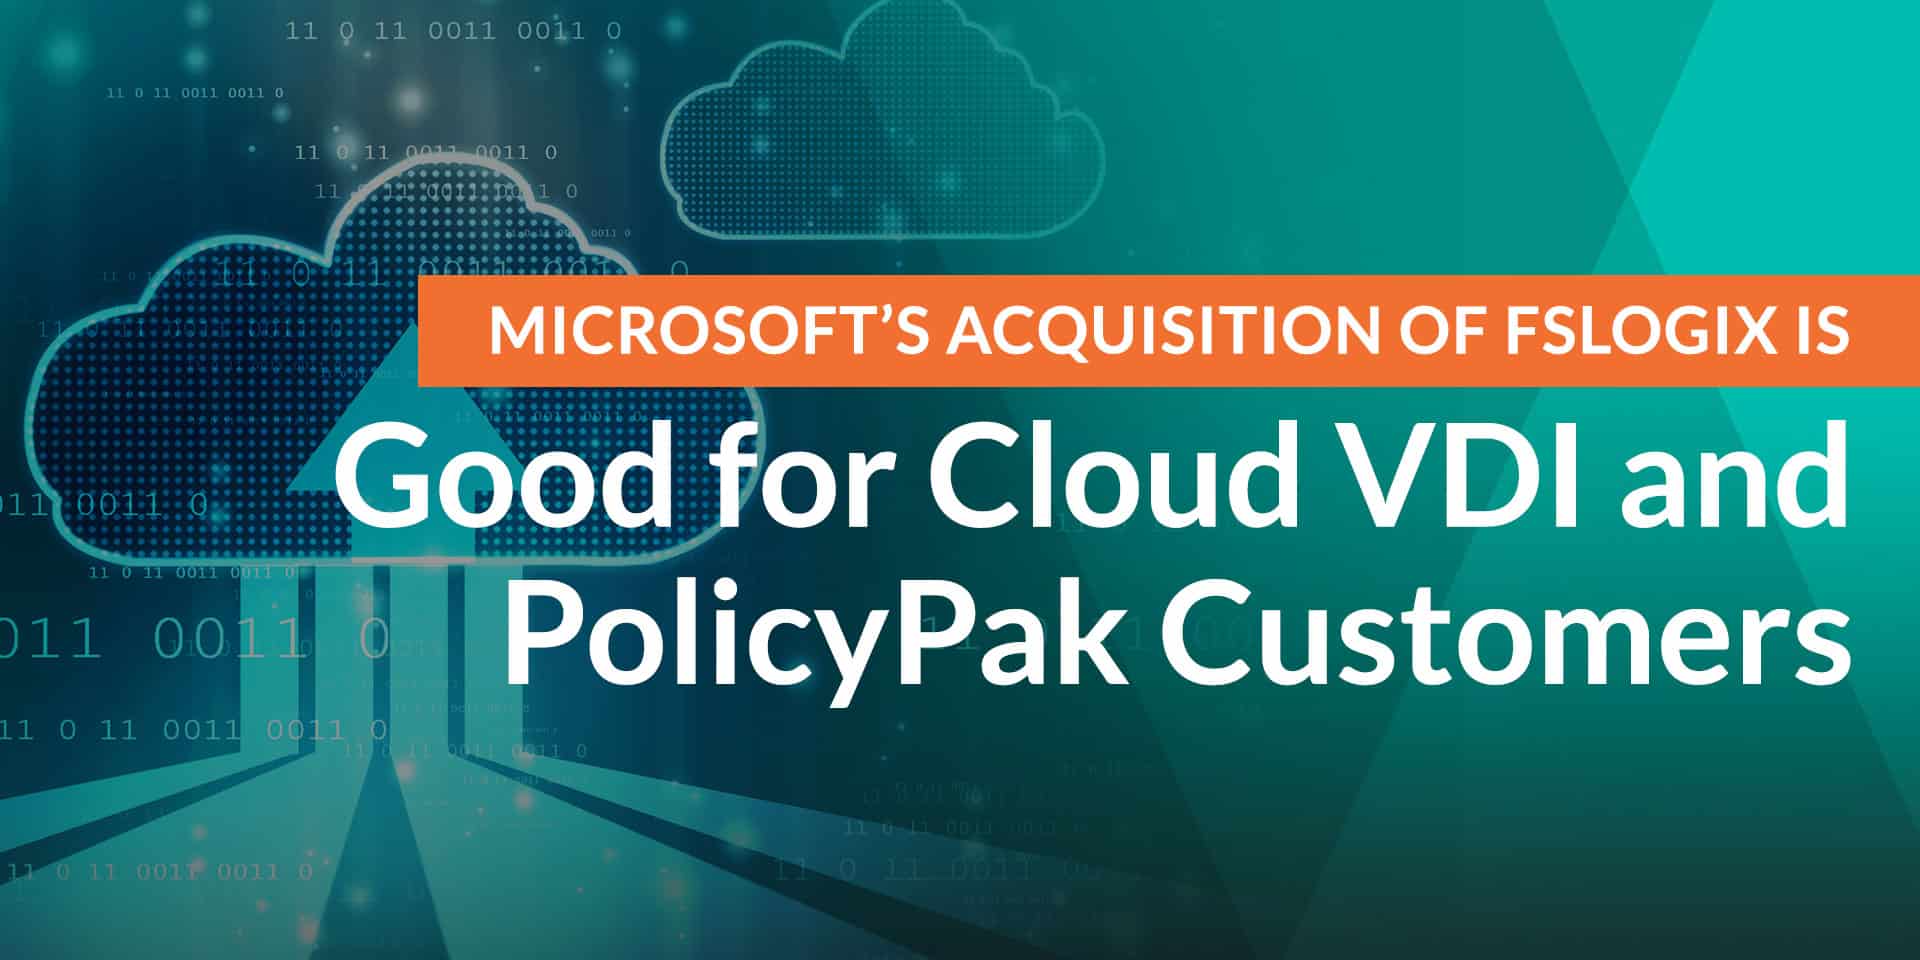 Microsoft's Acquisition of FSLogix is Good for Cloud VDI and